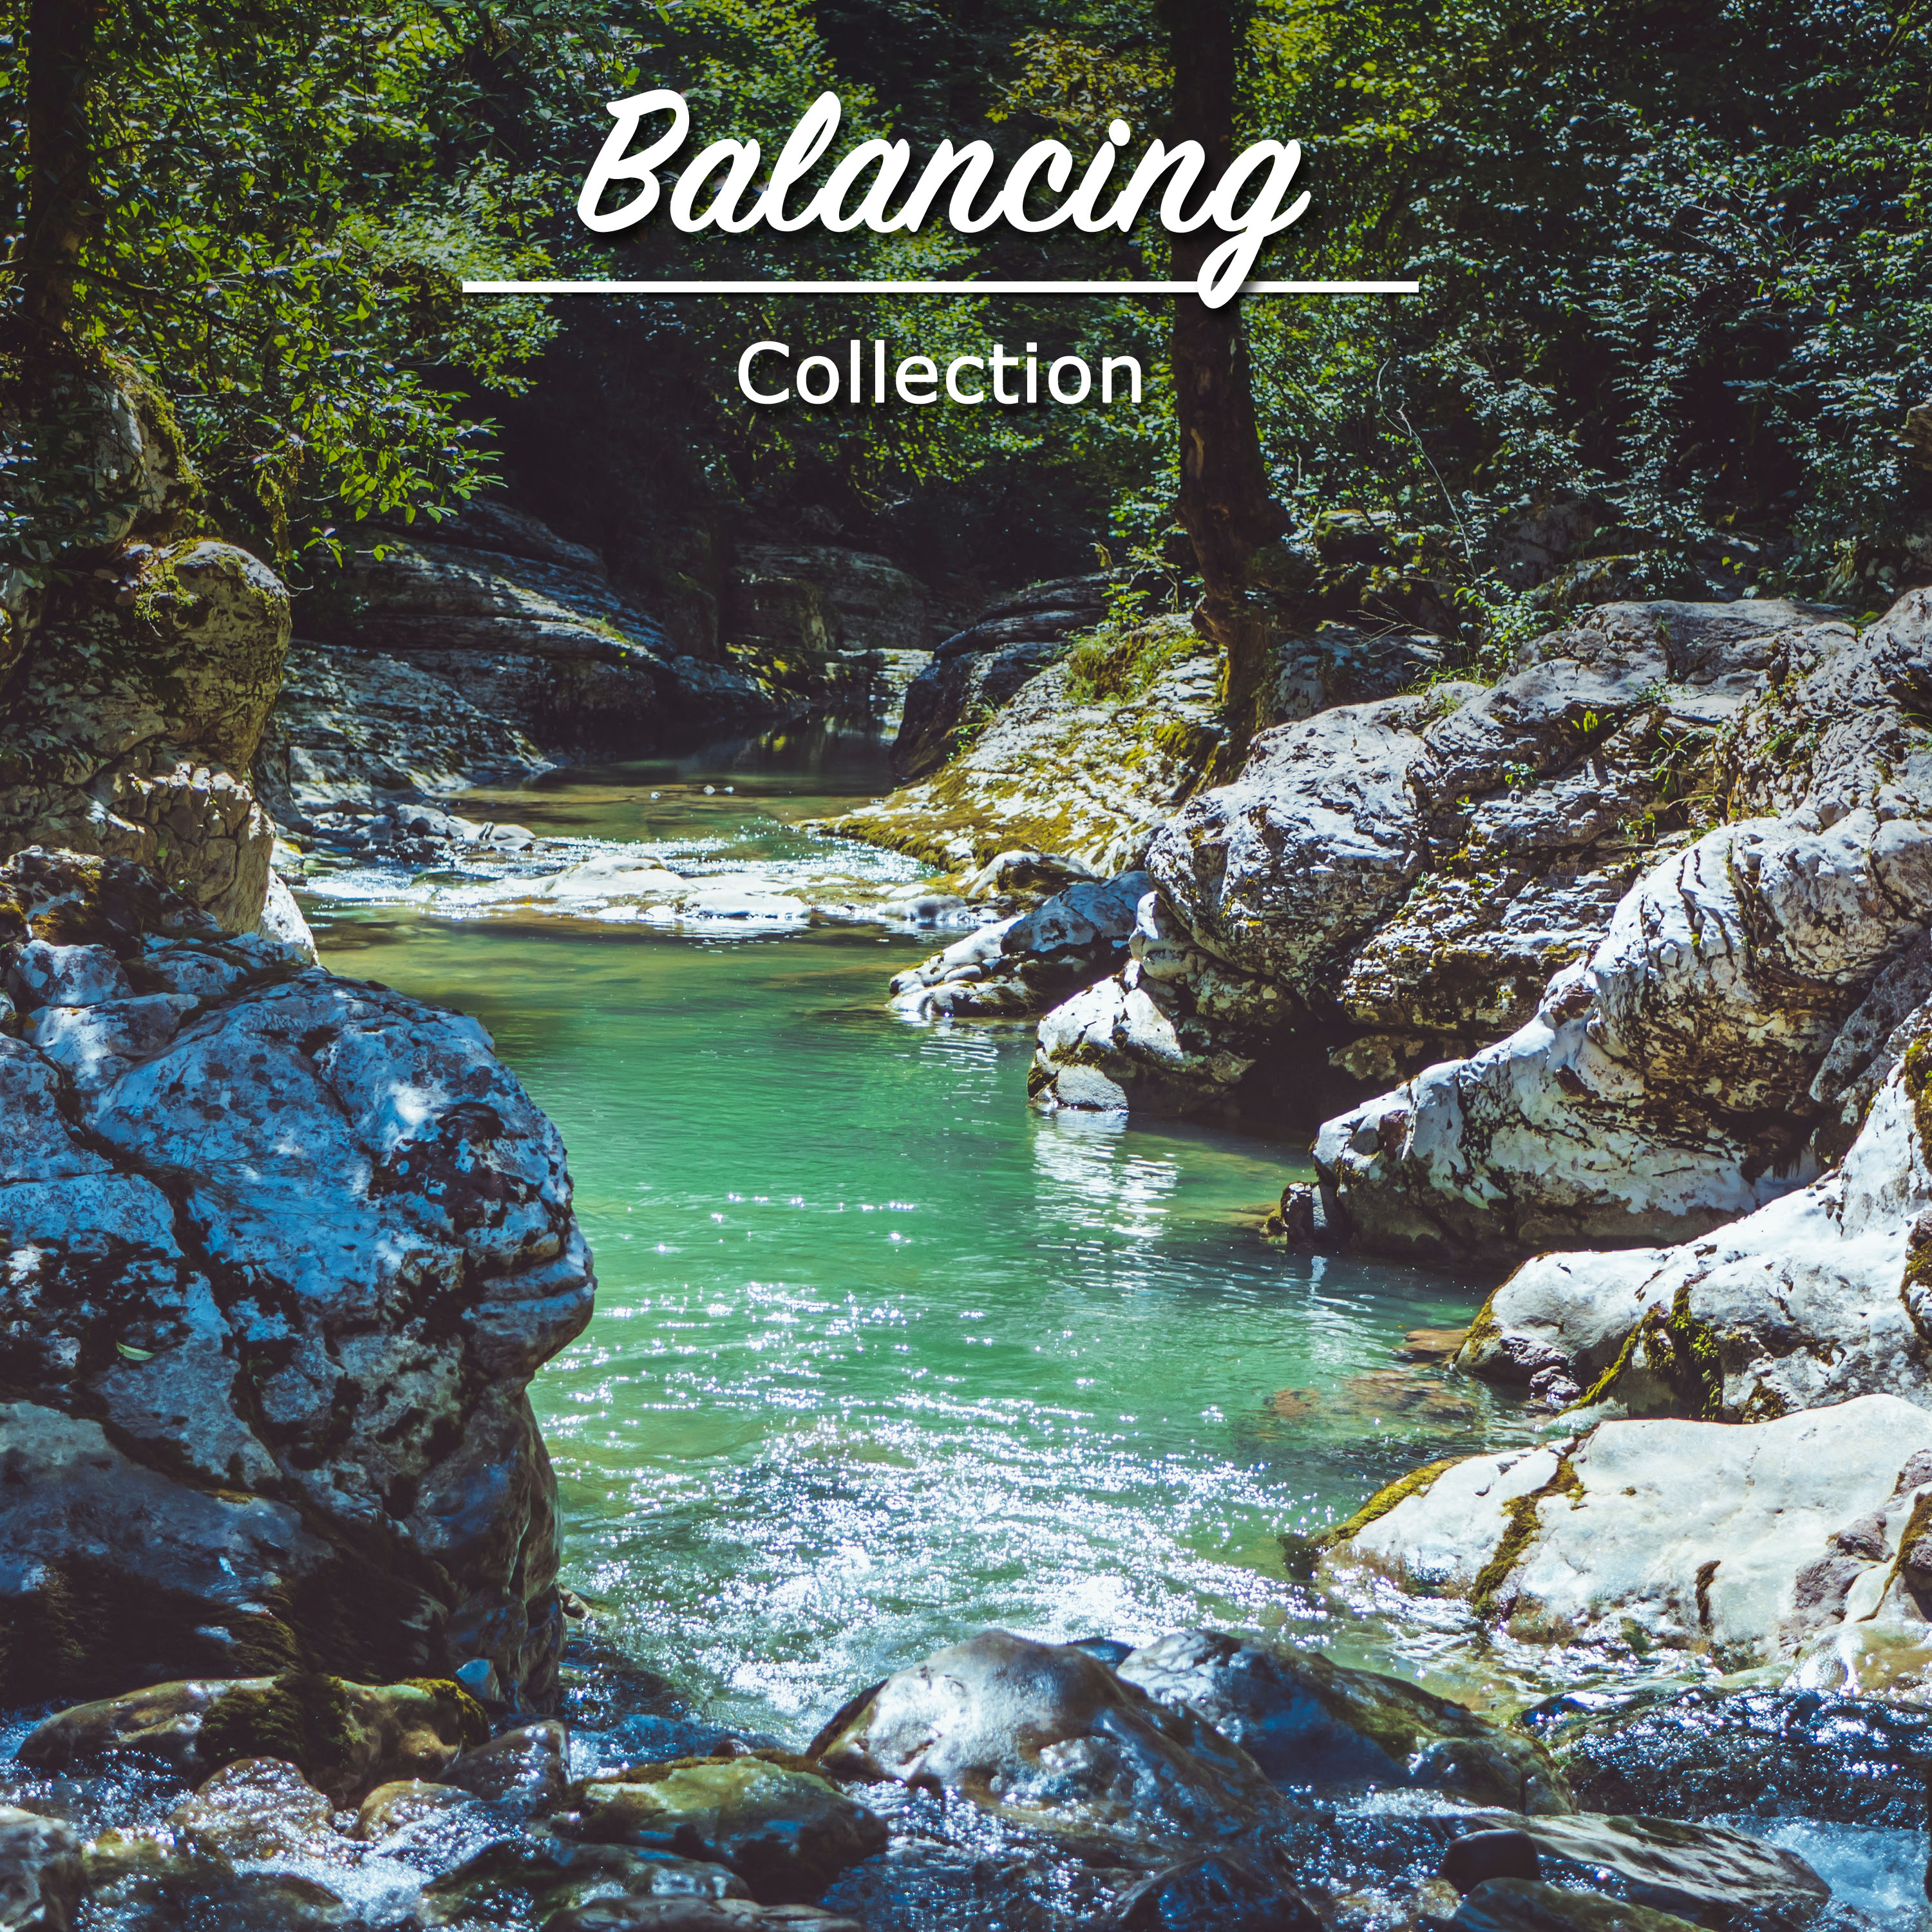 #21 Balancing Collection to Promote Wellness & Heal Chakras